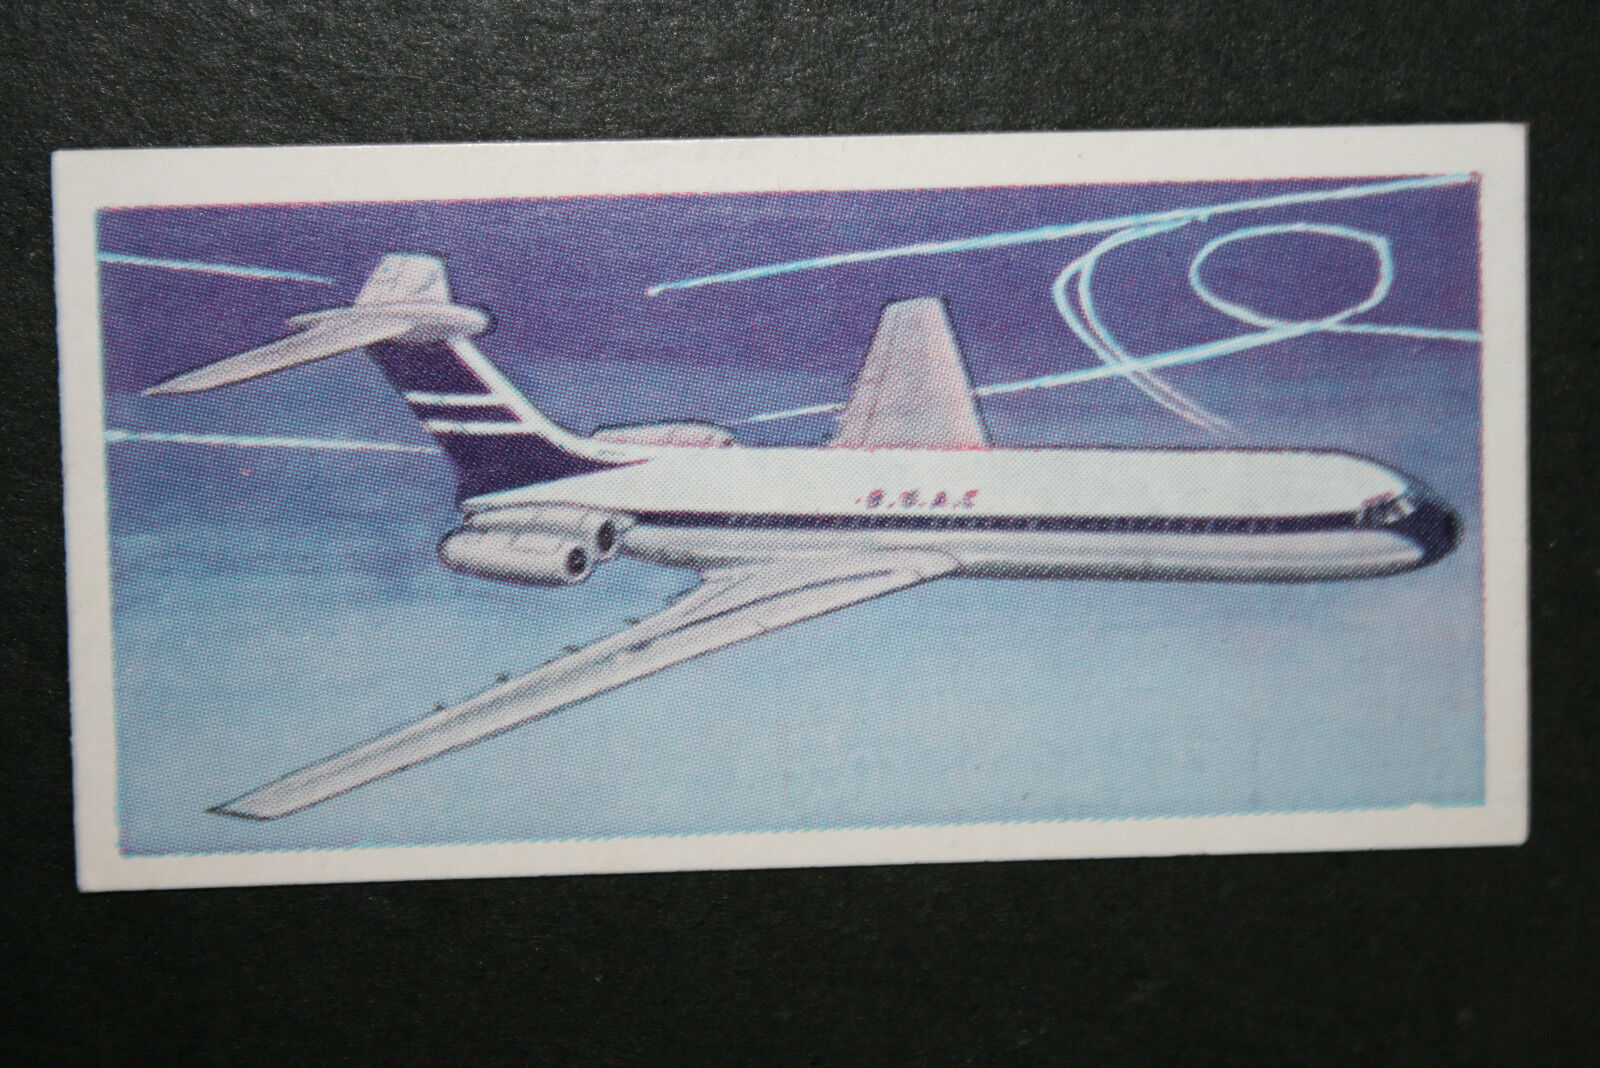 Vickers Armstrong V.C.10   BOAC     Vintage Illustrated Card  JB02